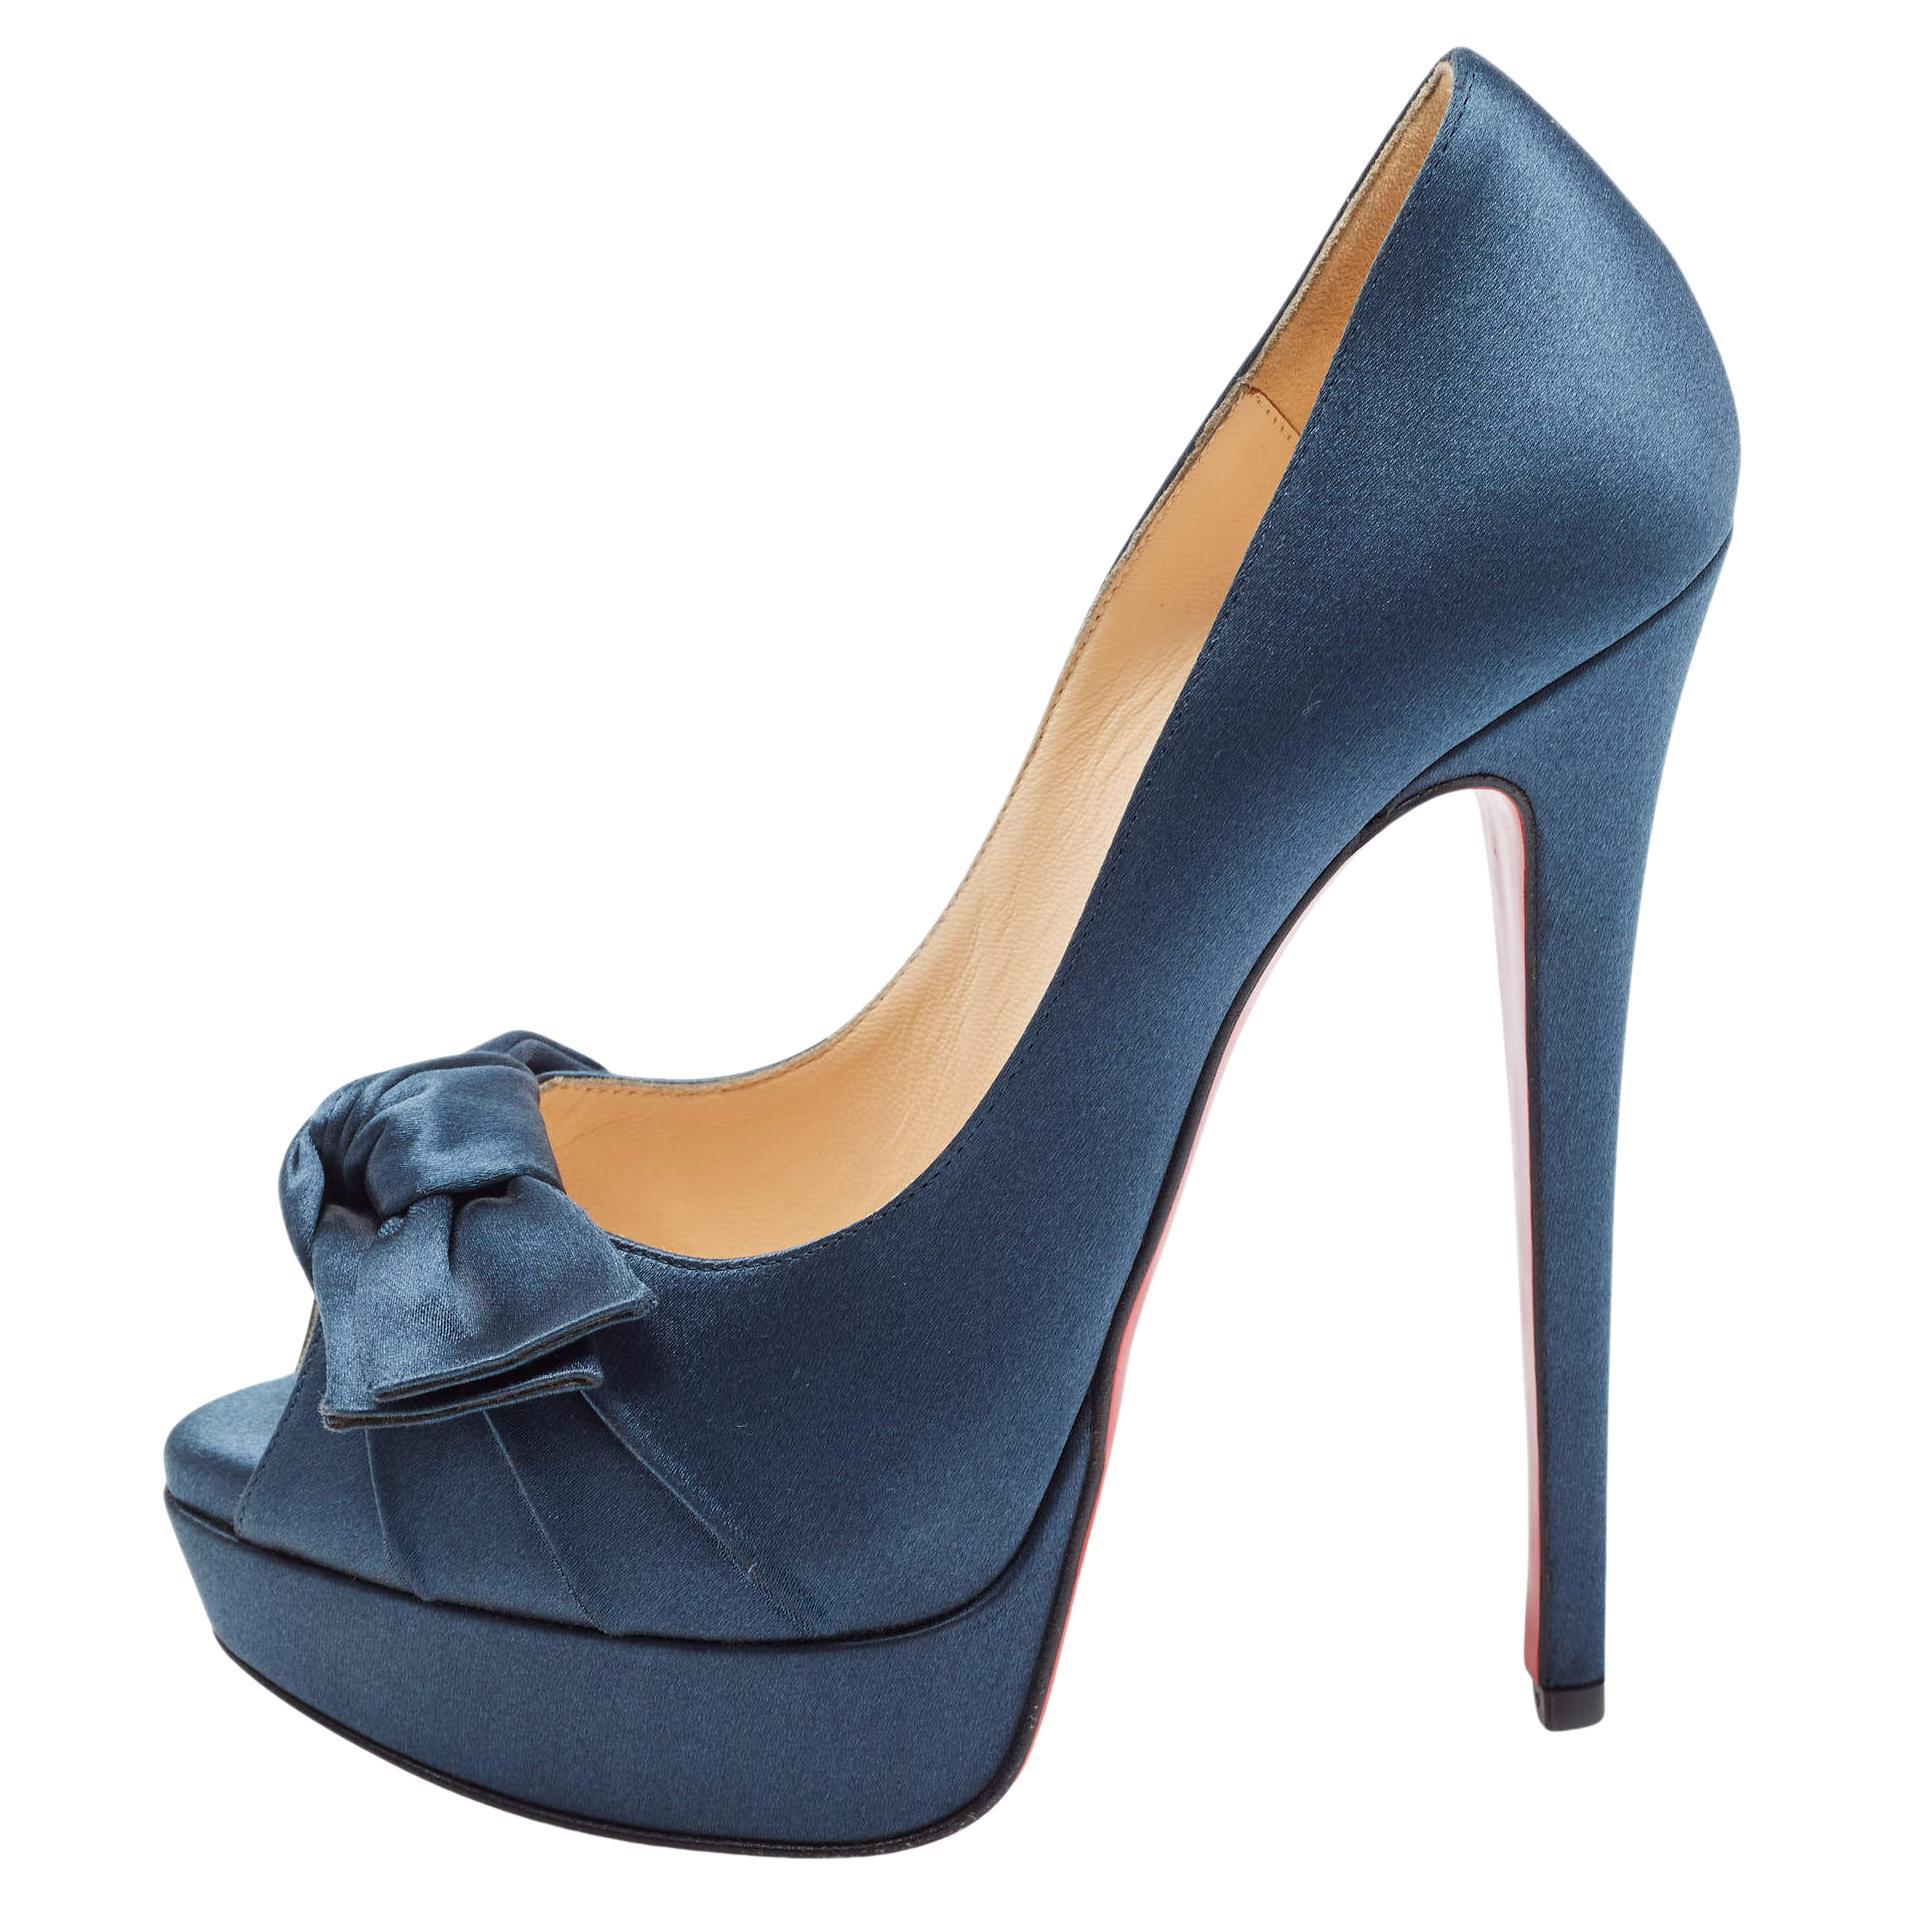 Christian Louboutin Teal Satin Madame Butterfly Pumps Size 37 For Sale